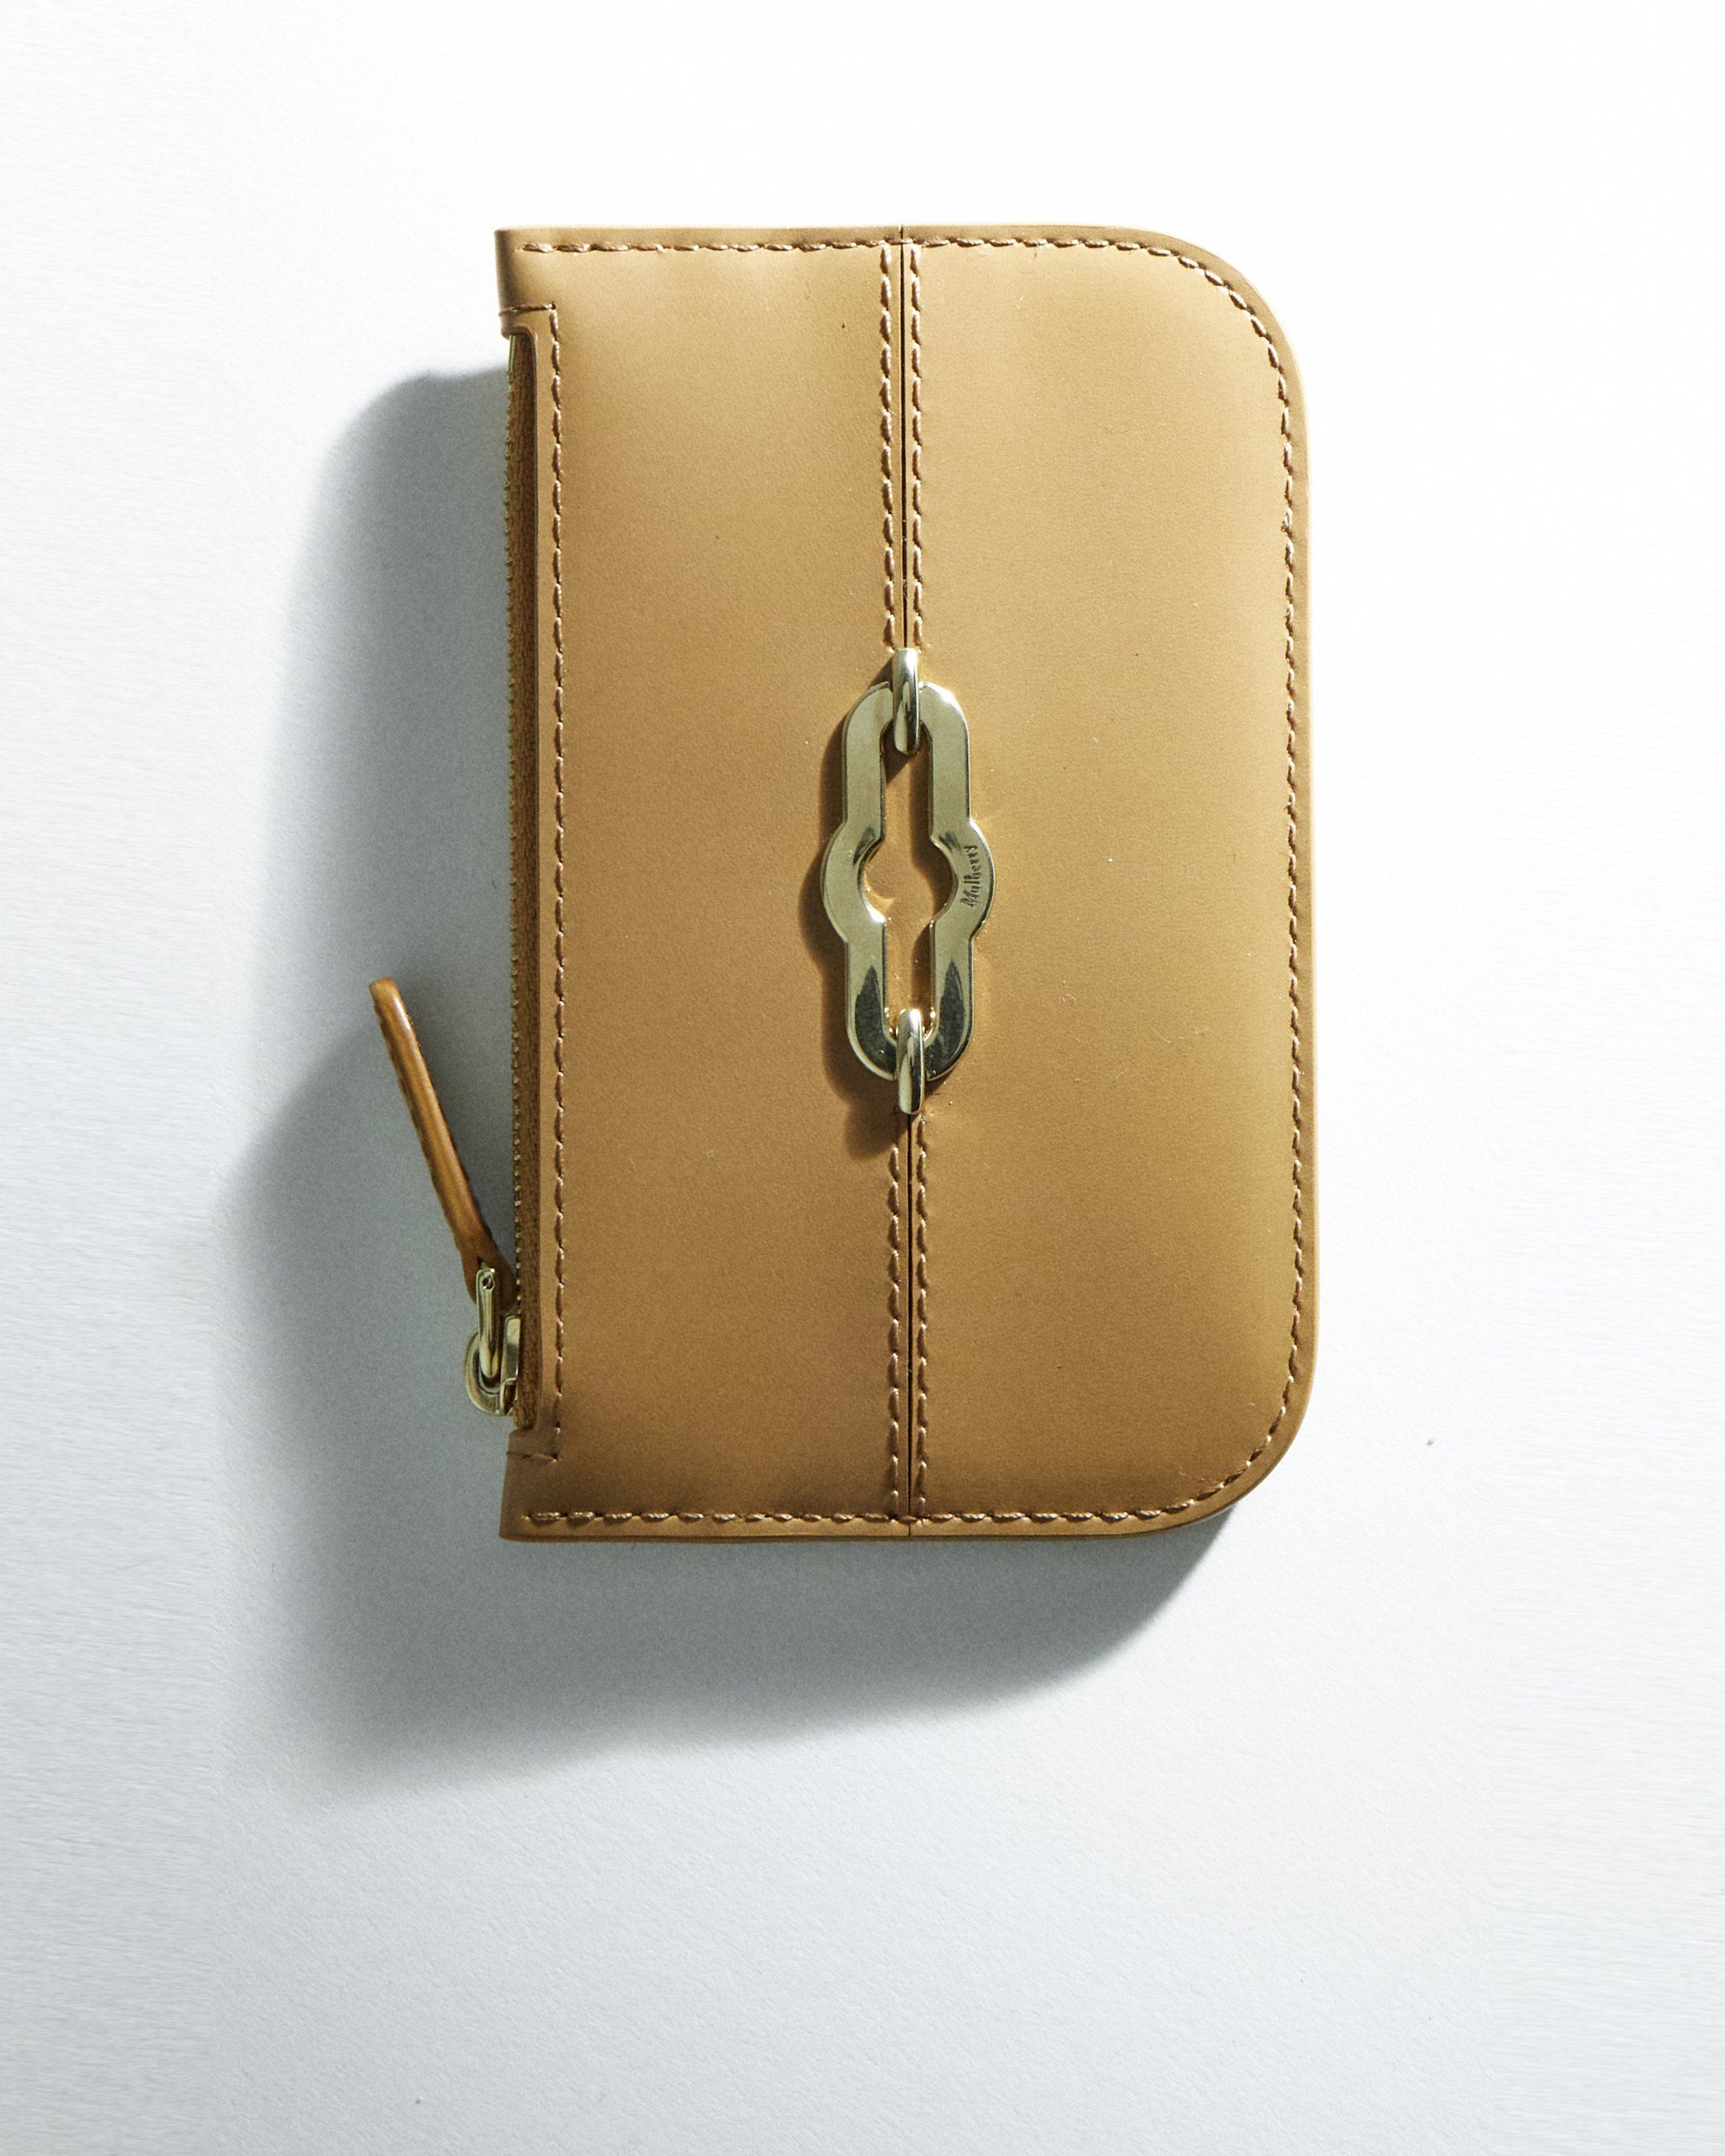 Mulberry Pimlico Zipped Wallet in beige leather